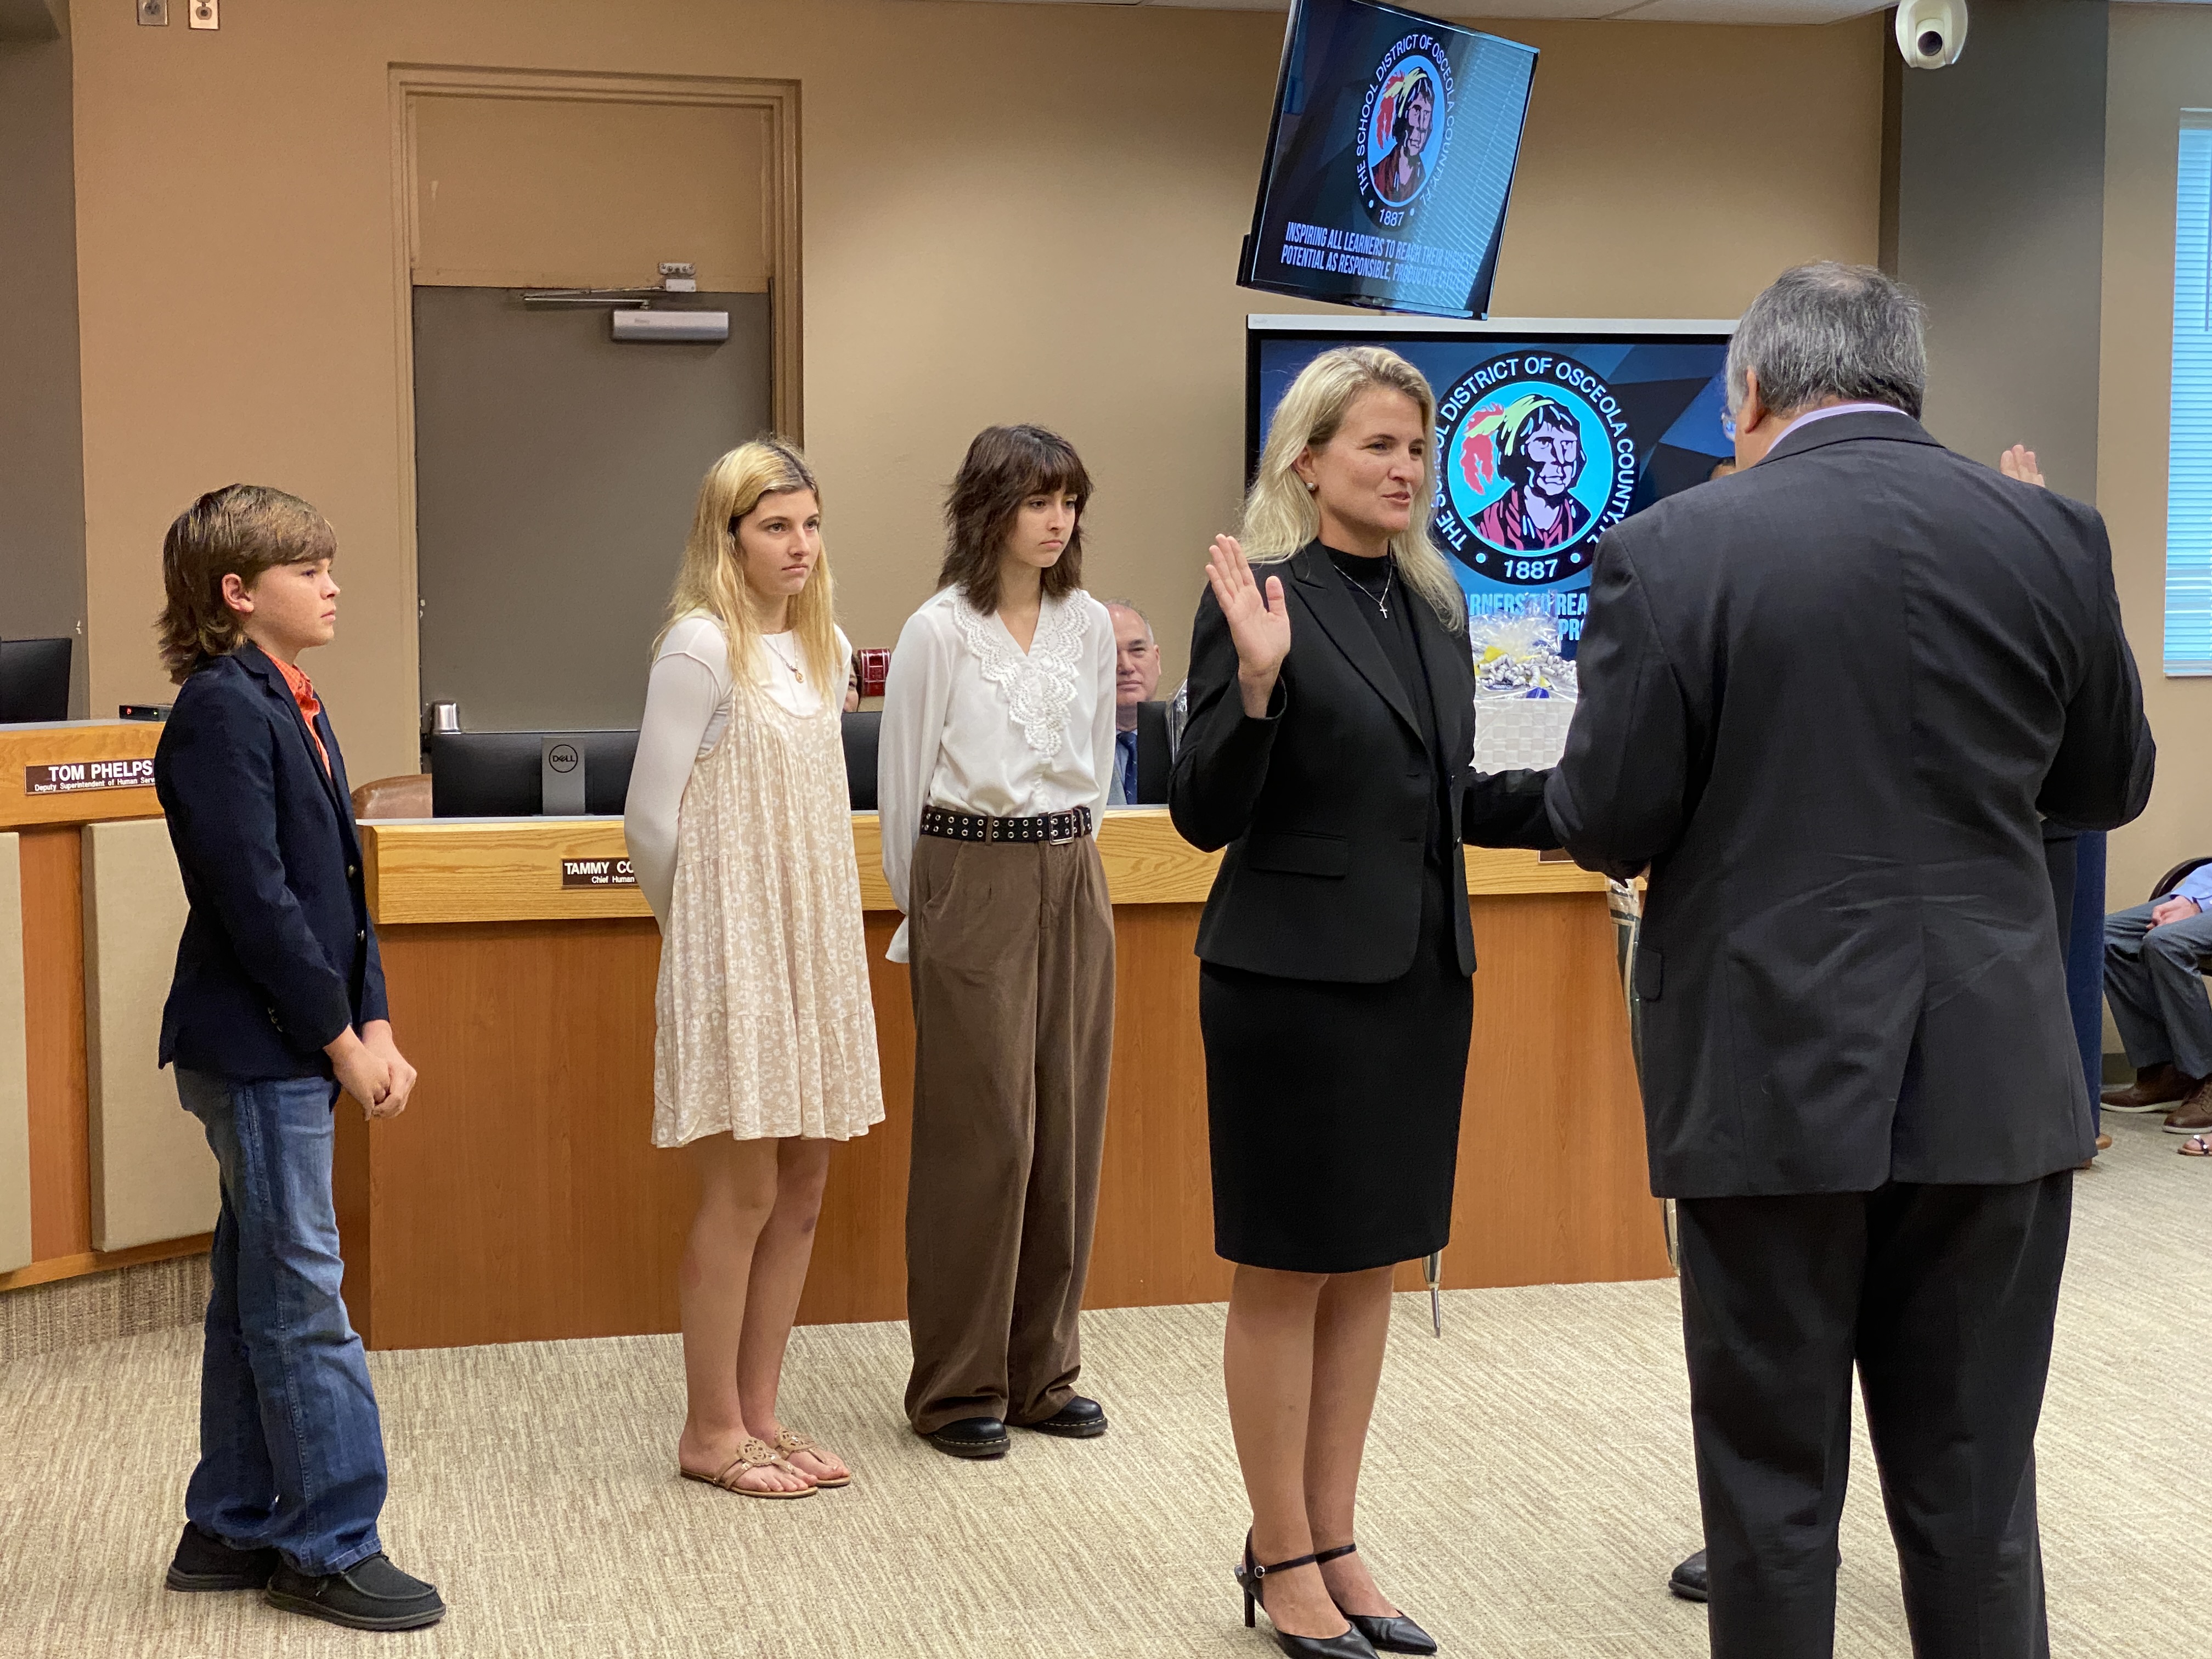 Mrs. Booth’s three children looking on as she is sworn into the school board.